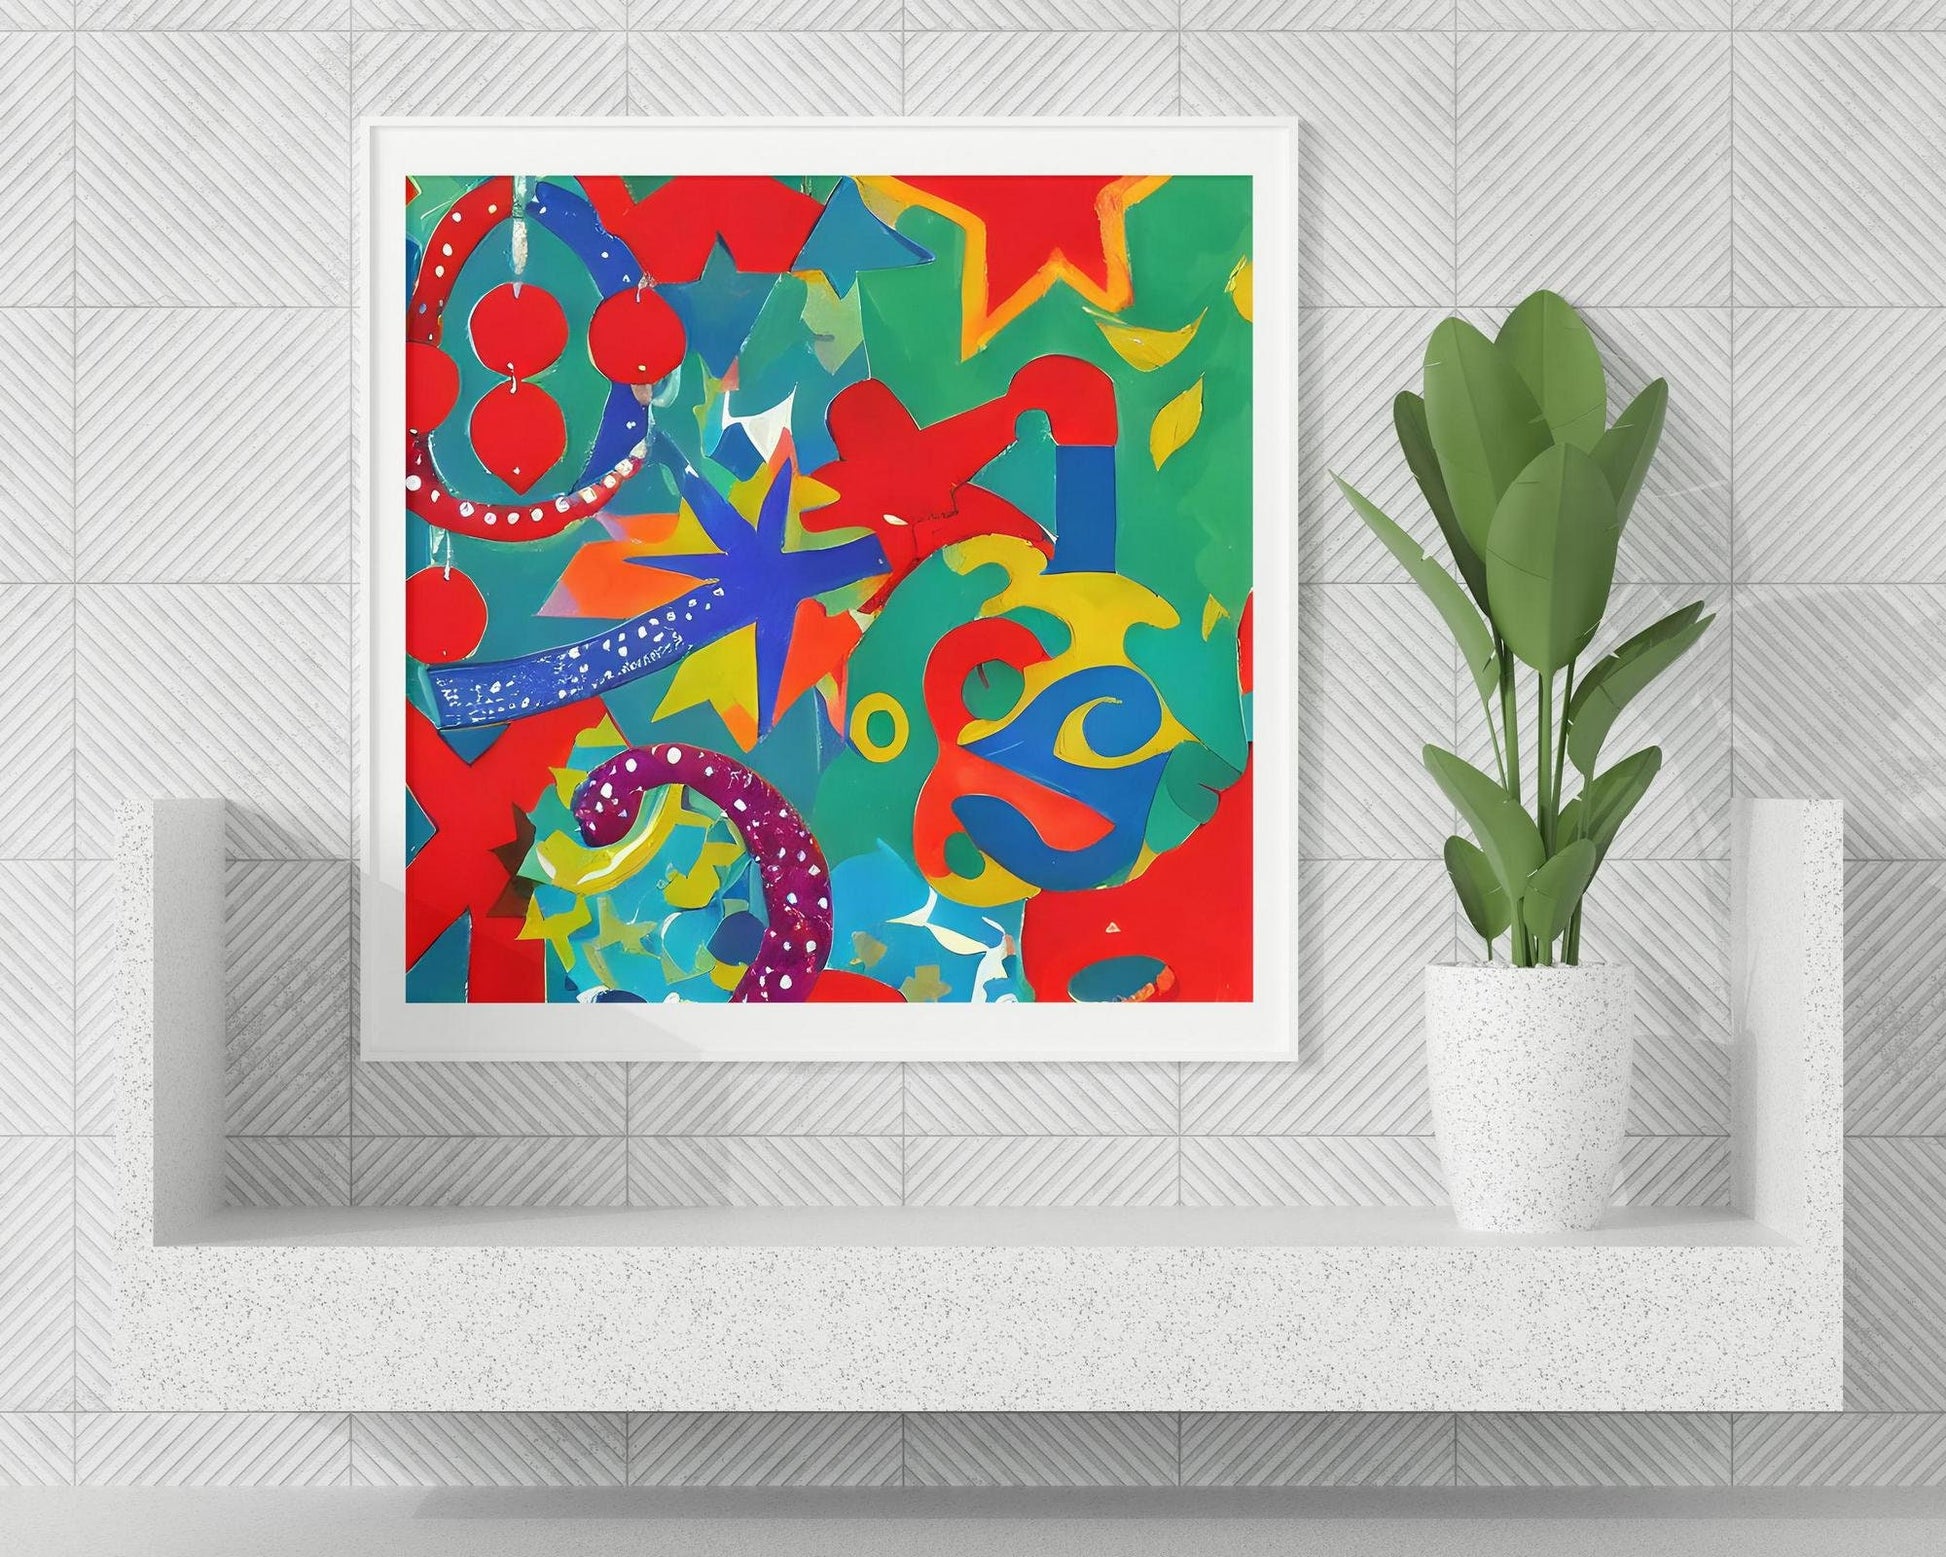 Christmas Decorations Canvas Print, Poster Art, Abstract Print, Square, Kids Wall Art, Framed Art Print, Print From Original Painting